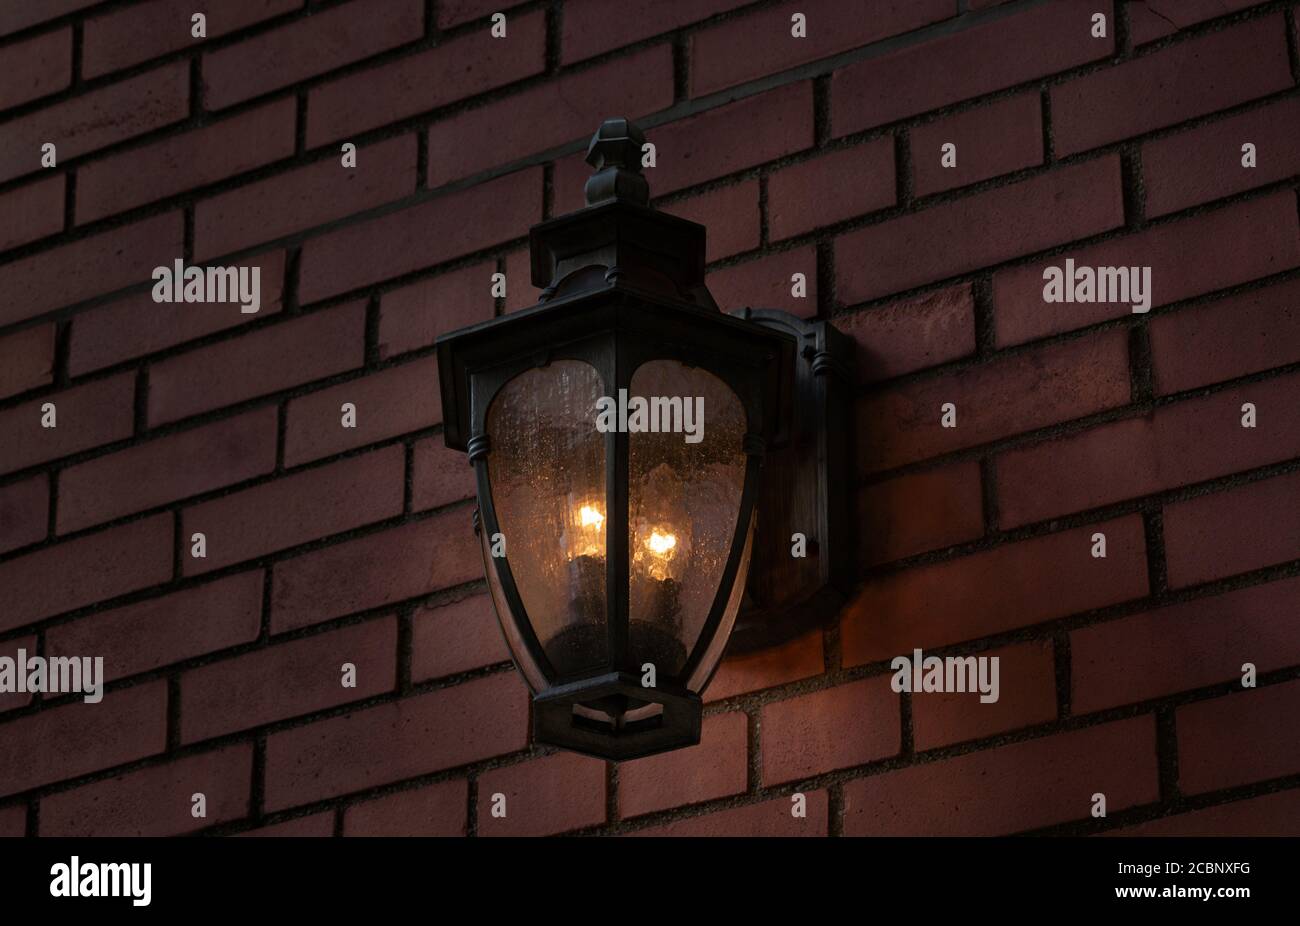 a black iron metal antique illuminated wall sconce on an exterior brick wall at night giving off a warm glowing light Stock Photo